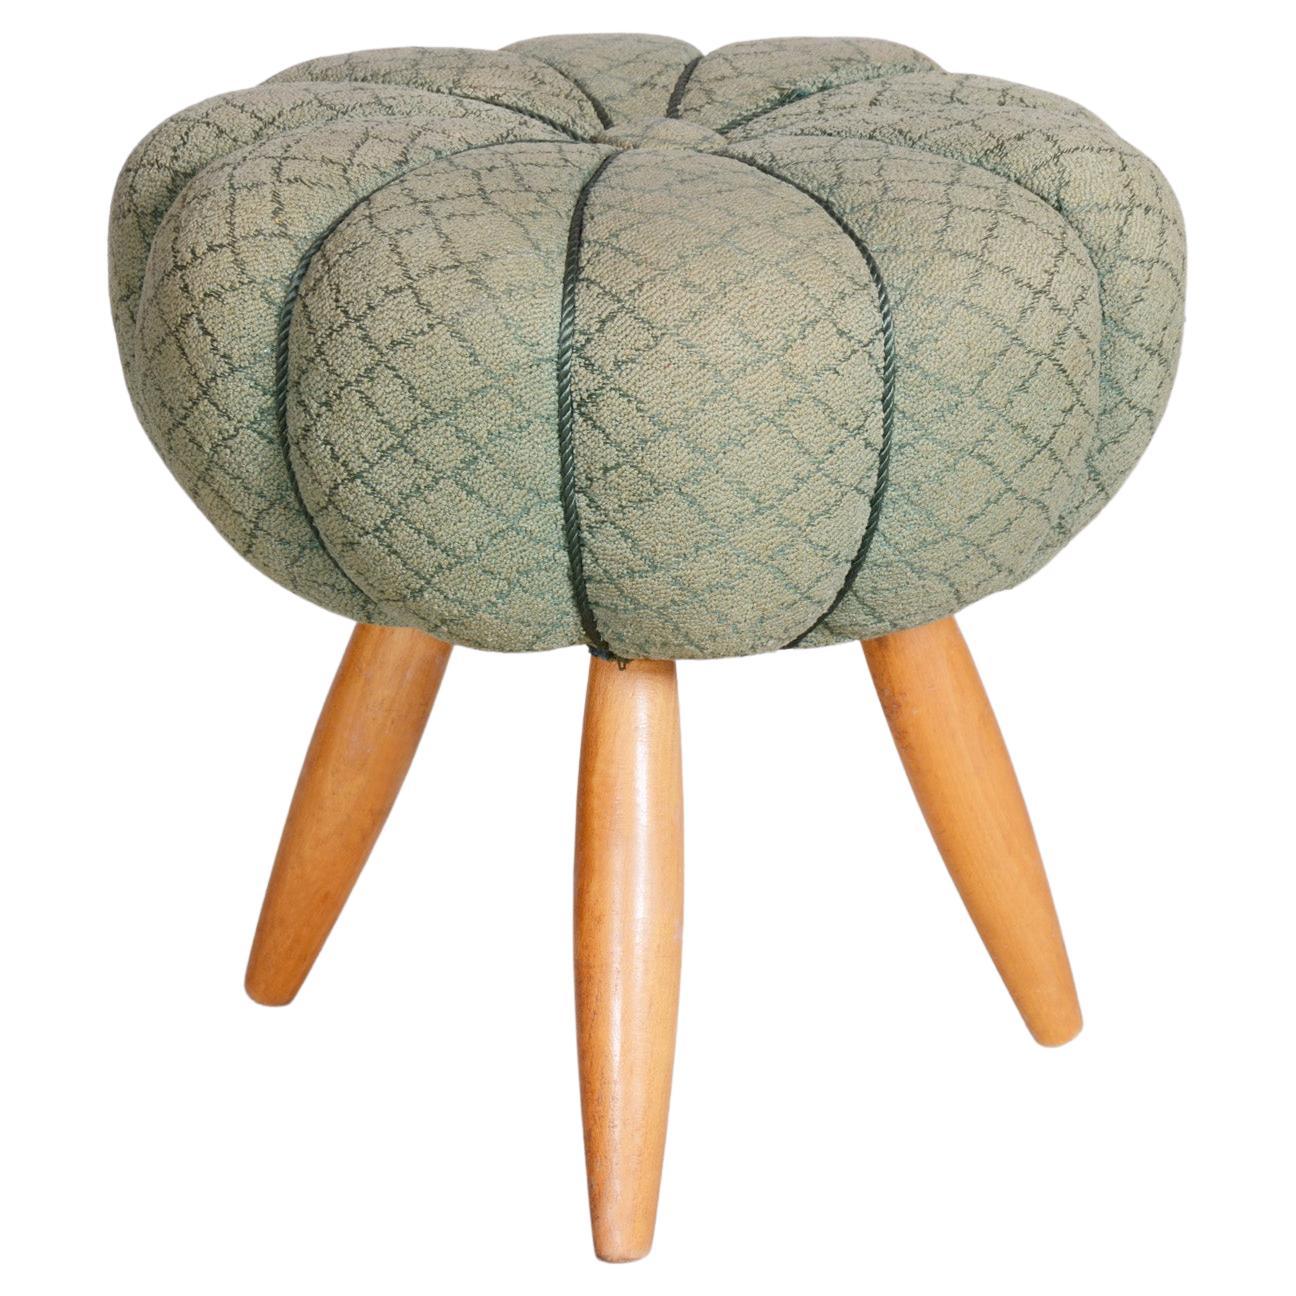 Green Midcentury Beech Stool, 1950s, Original Preserved Condition For Sale